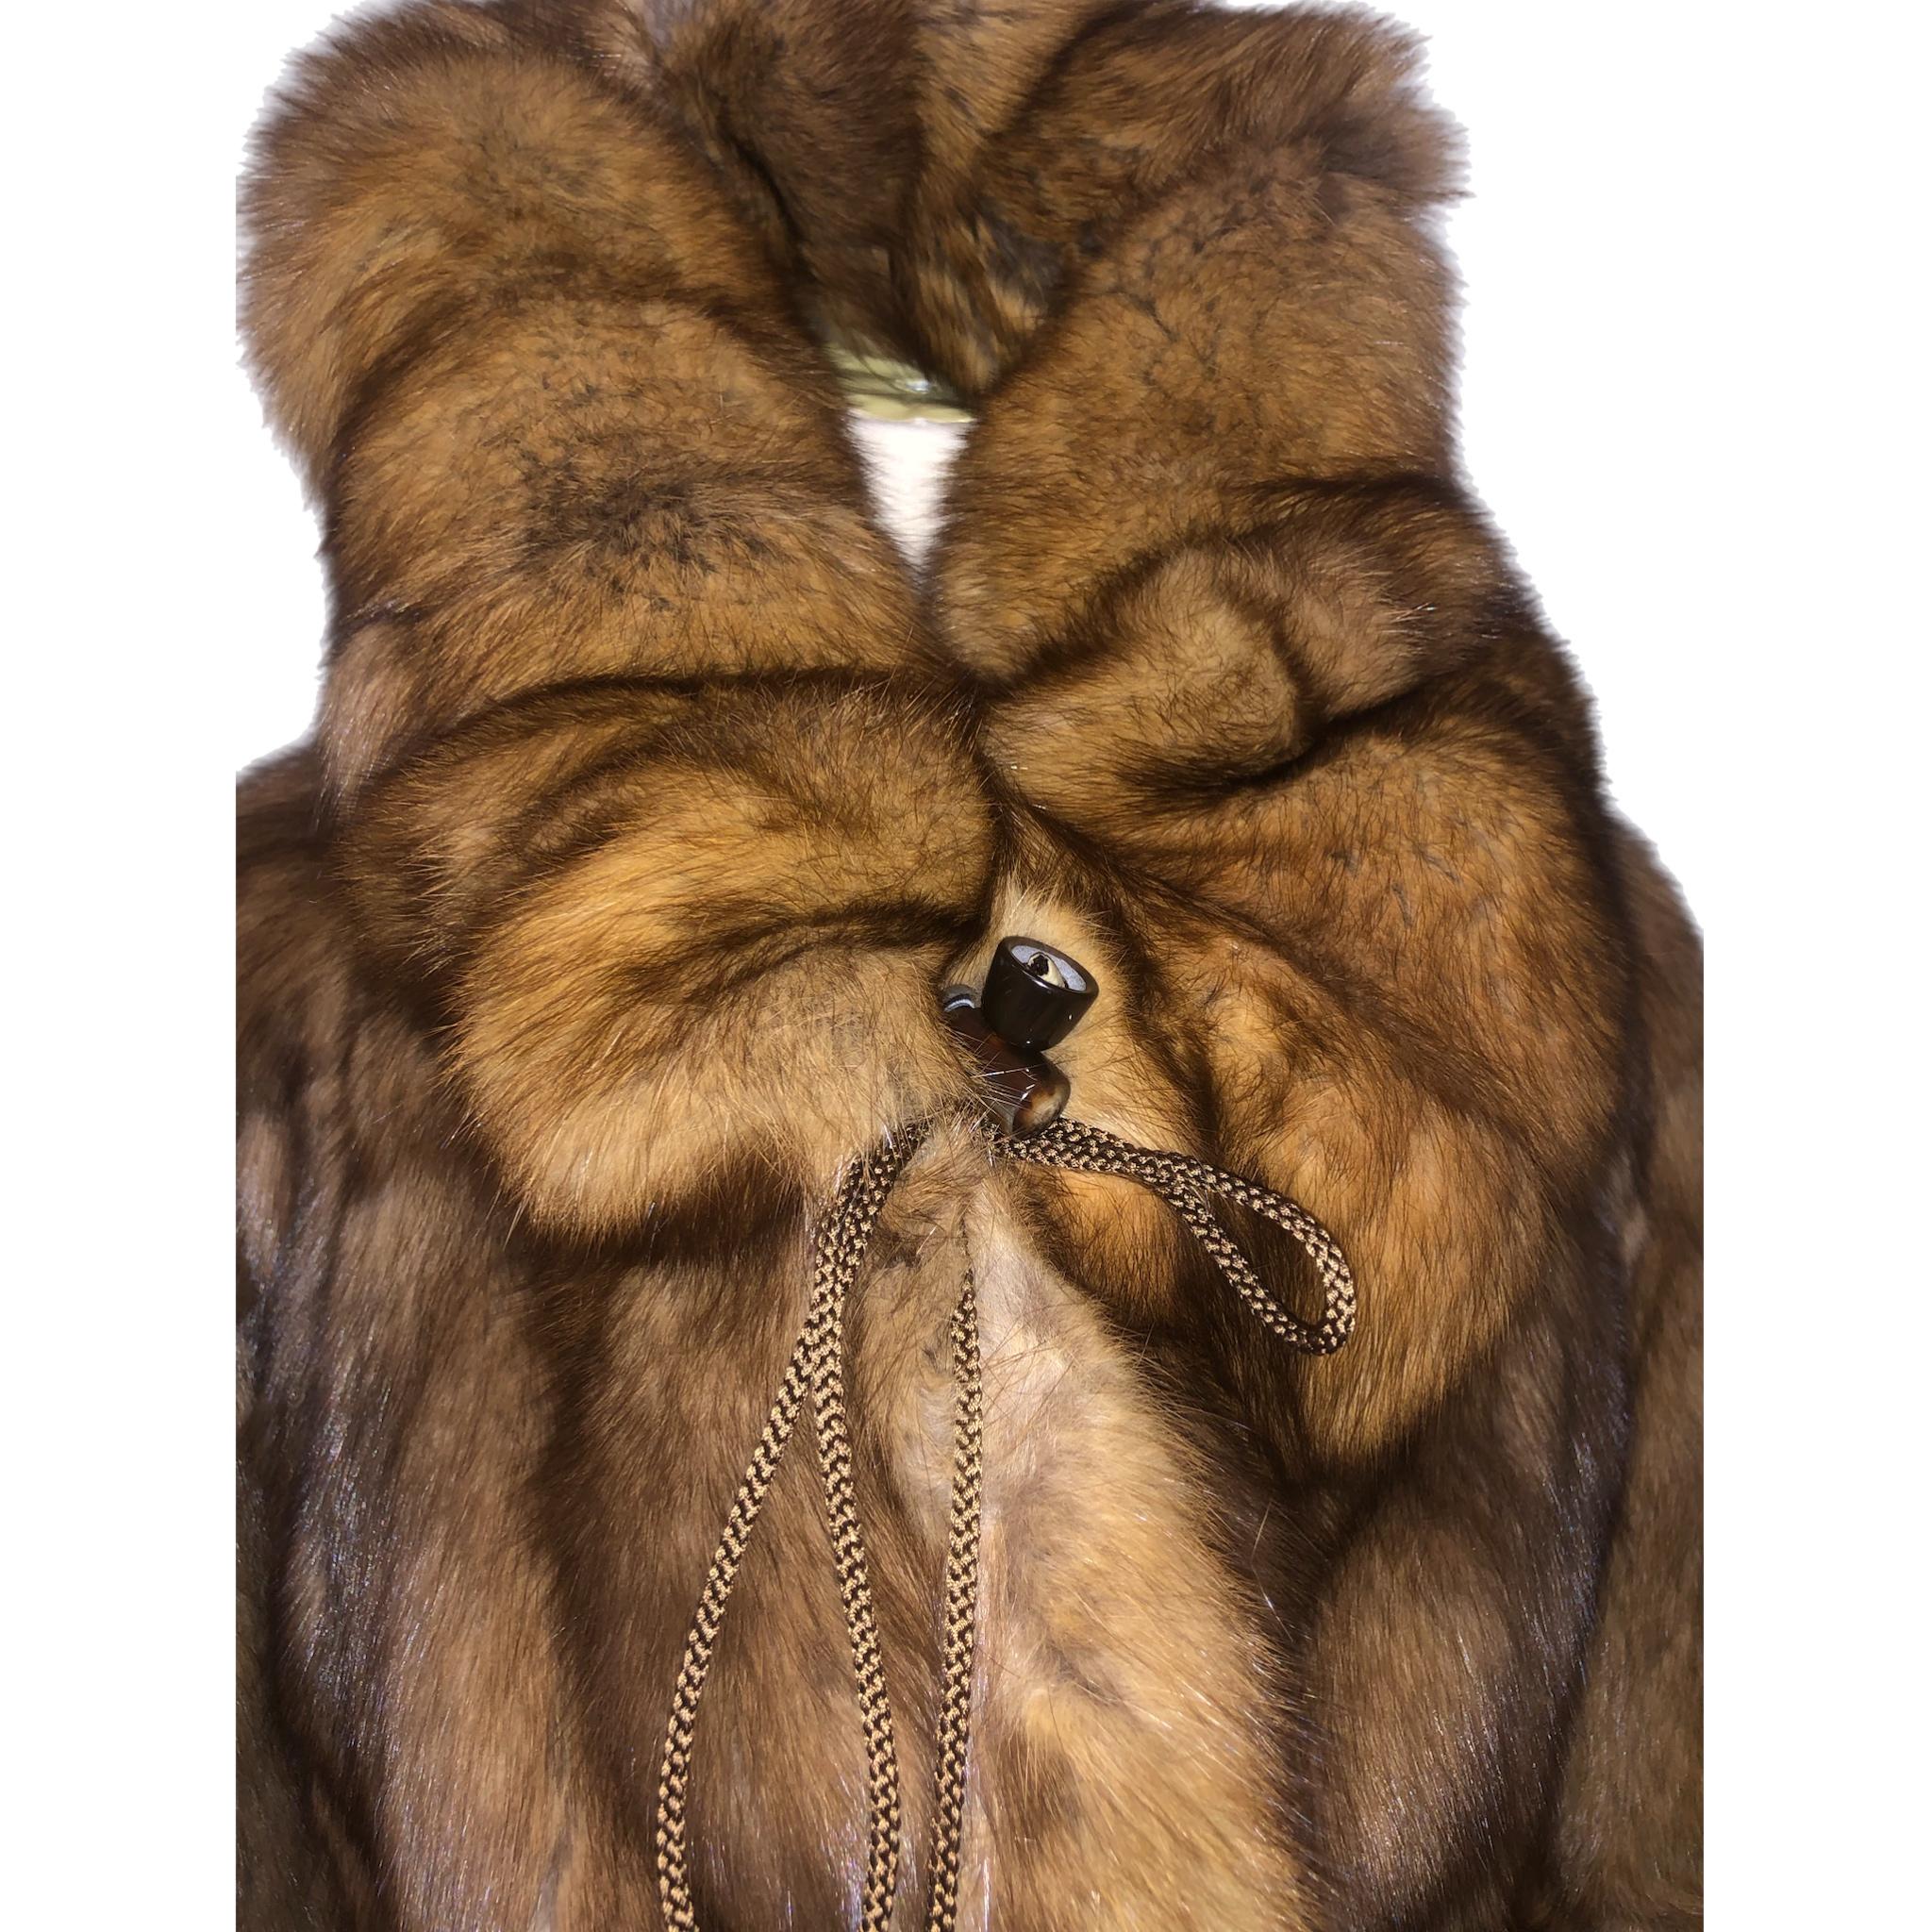 Bisang Russian Sable fur coat size 14-16 tags 65000$ For Sale 6